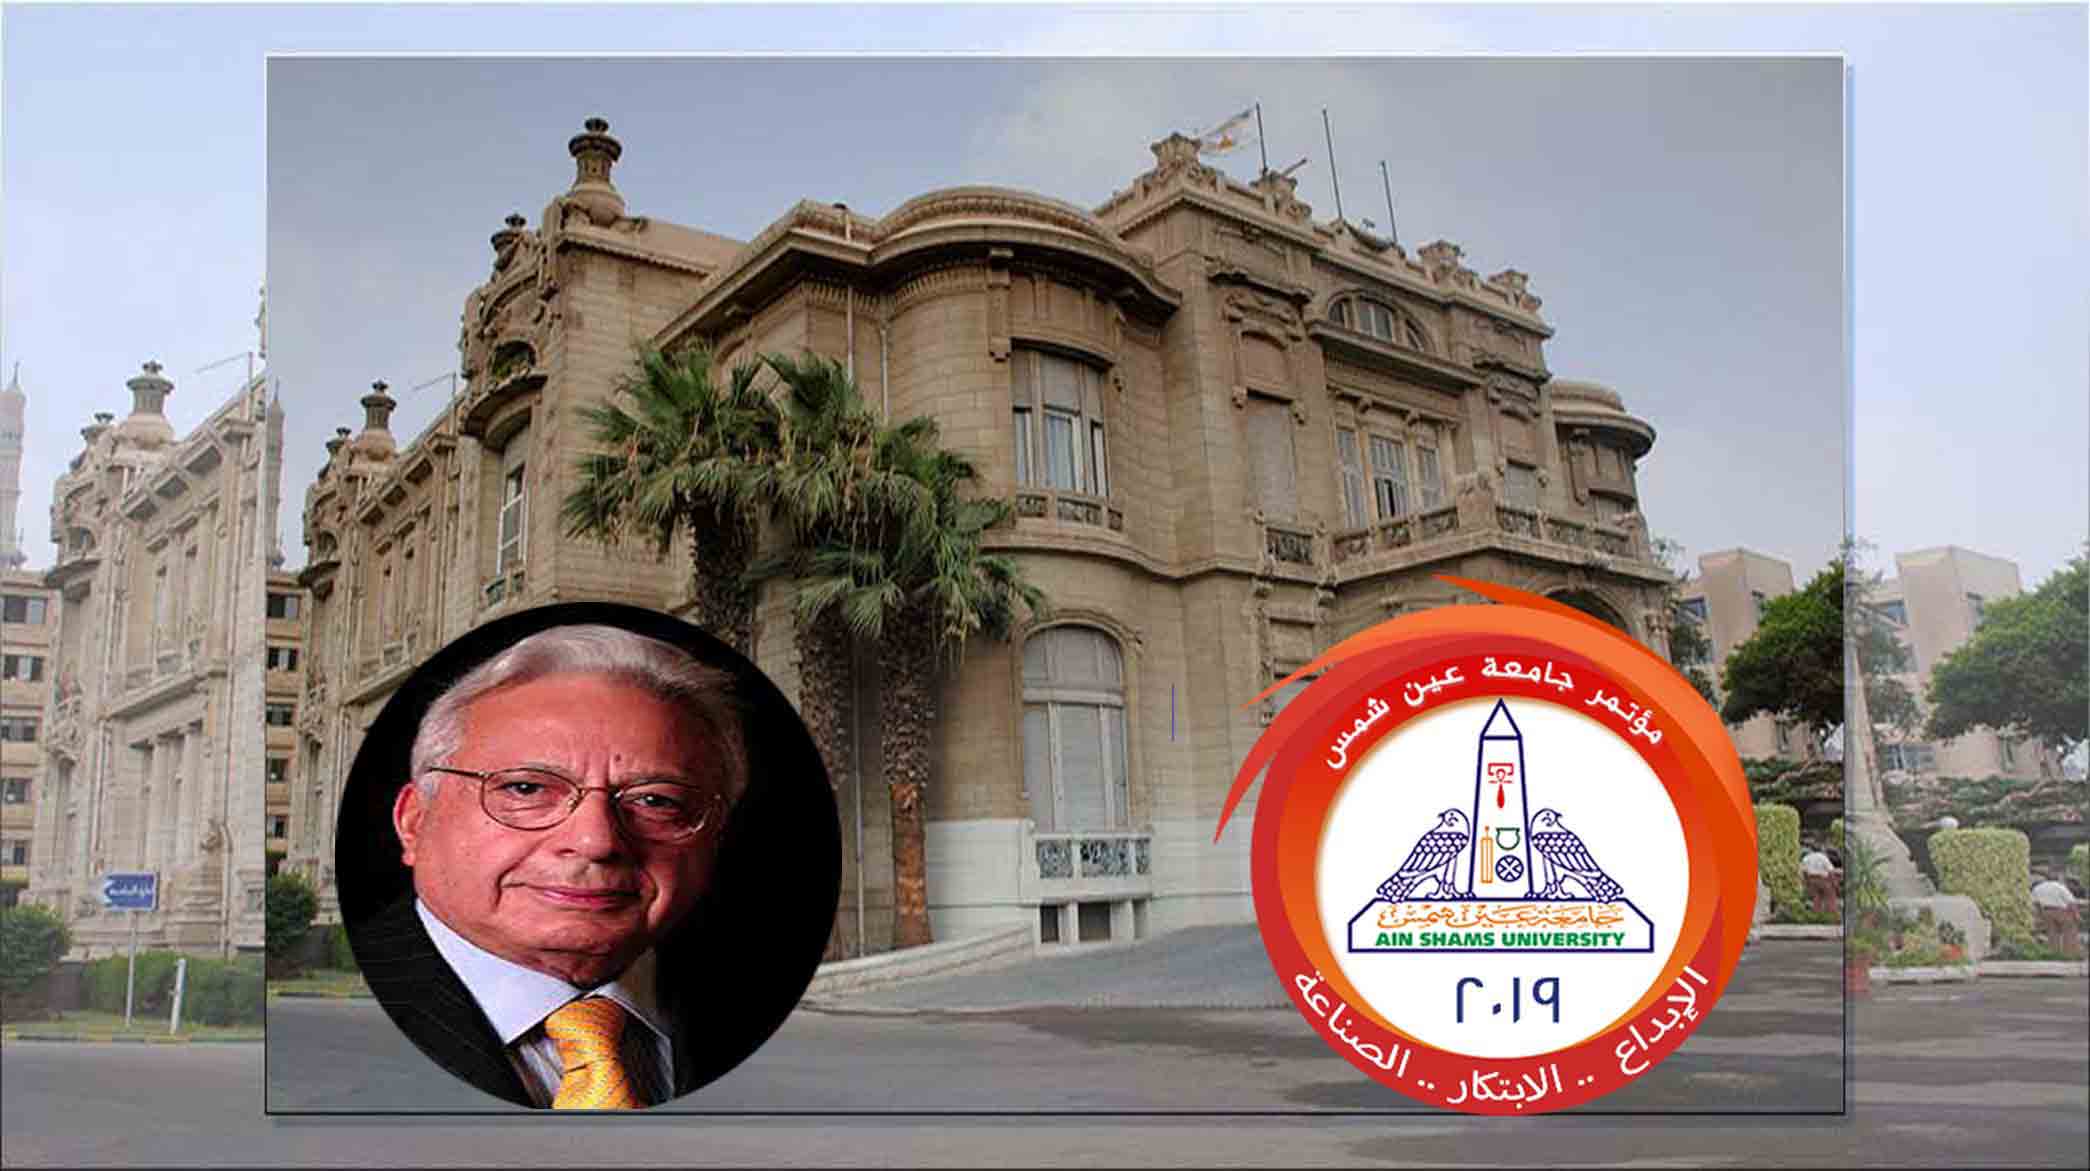 Ain Shams University awards honorary doctorate to Prof. Dr. Ahmed Okasha at its 8th Scientific Conference "Creativity ... Innovation ... Industry"